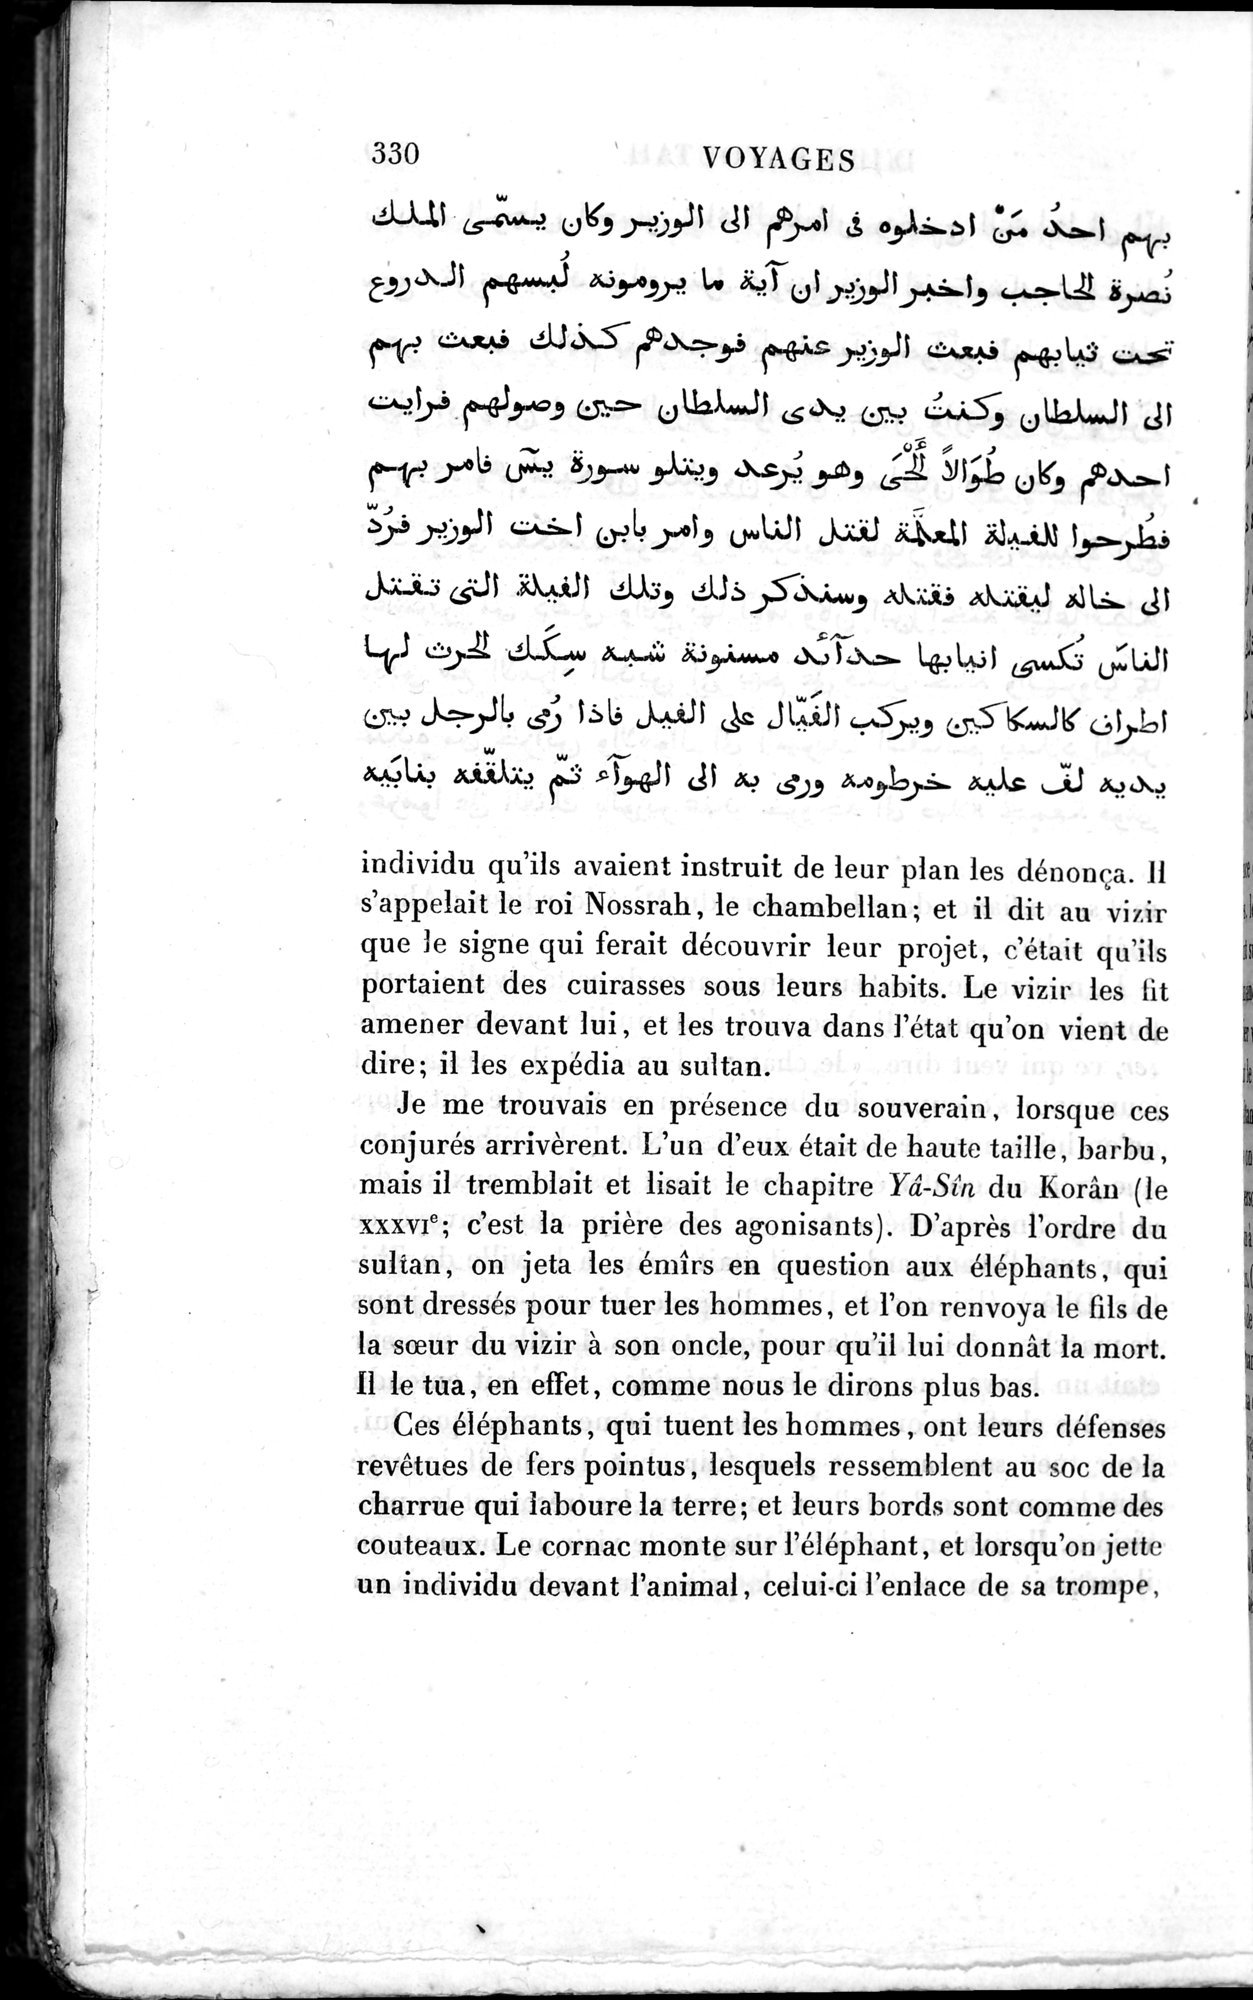 Voyages d'Ibn Batoutah : vol.3 / Page 370 (Grayscale High Resolution Image)